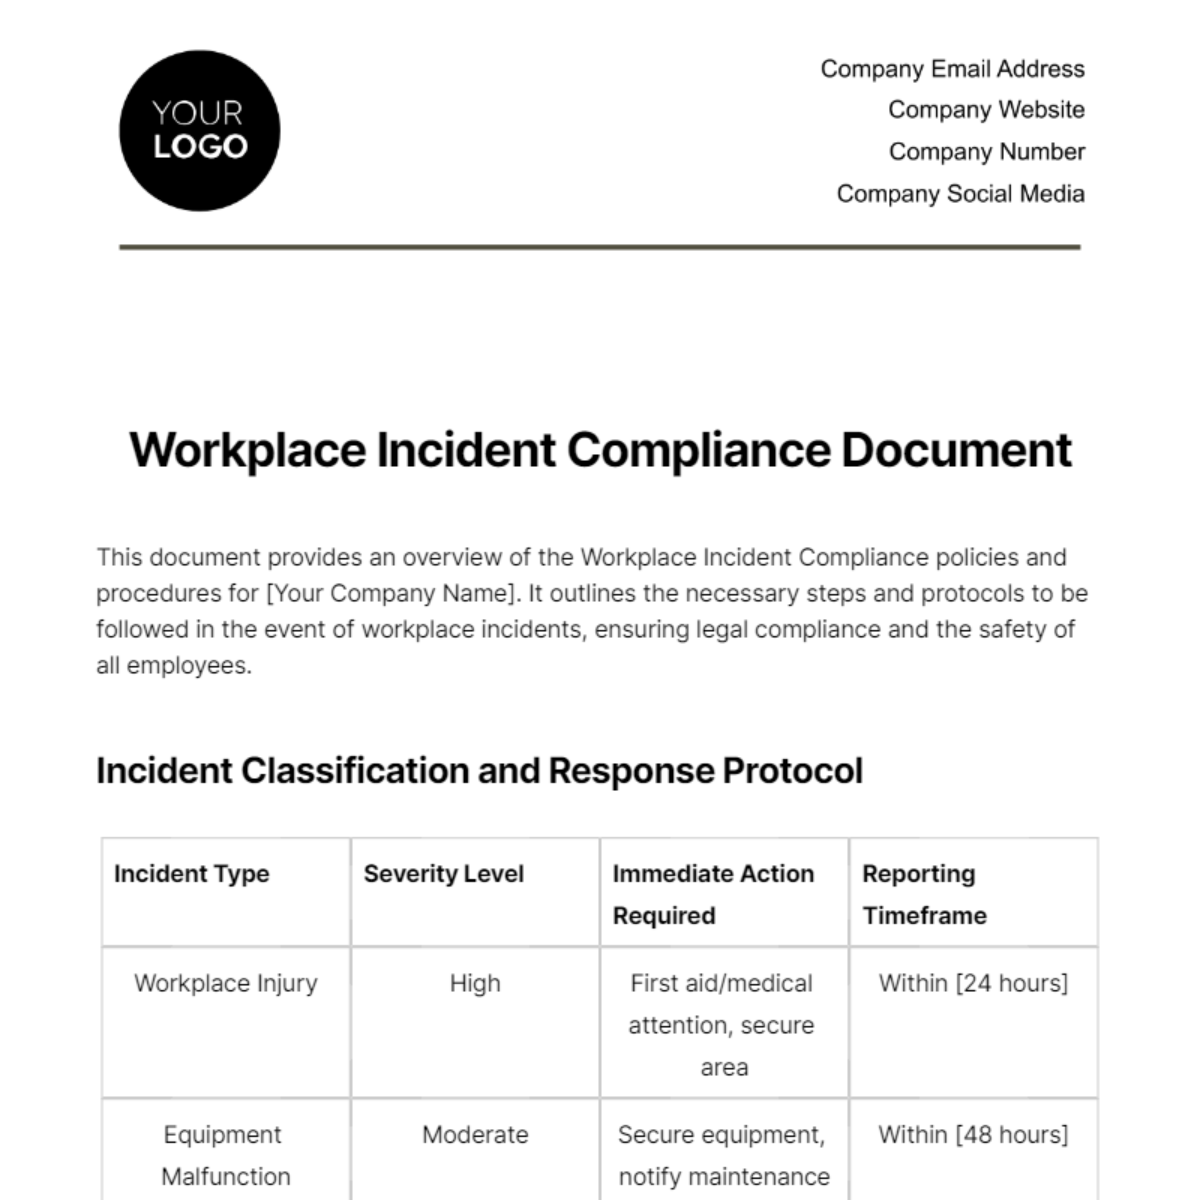 Workplace Incident Compliance Document Template